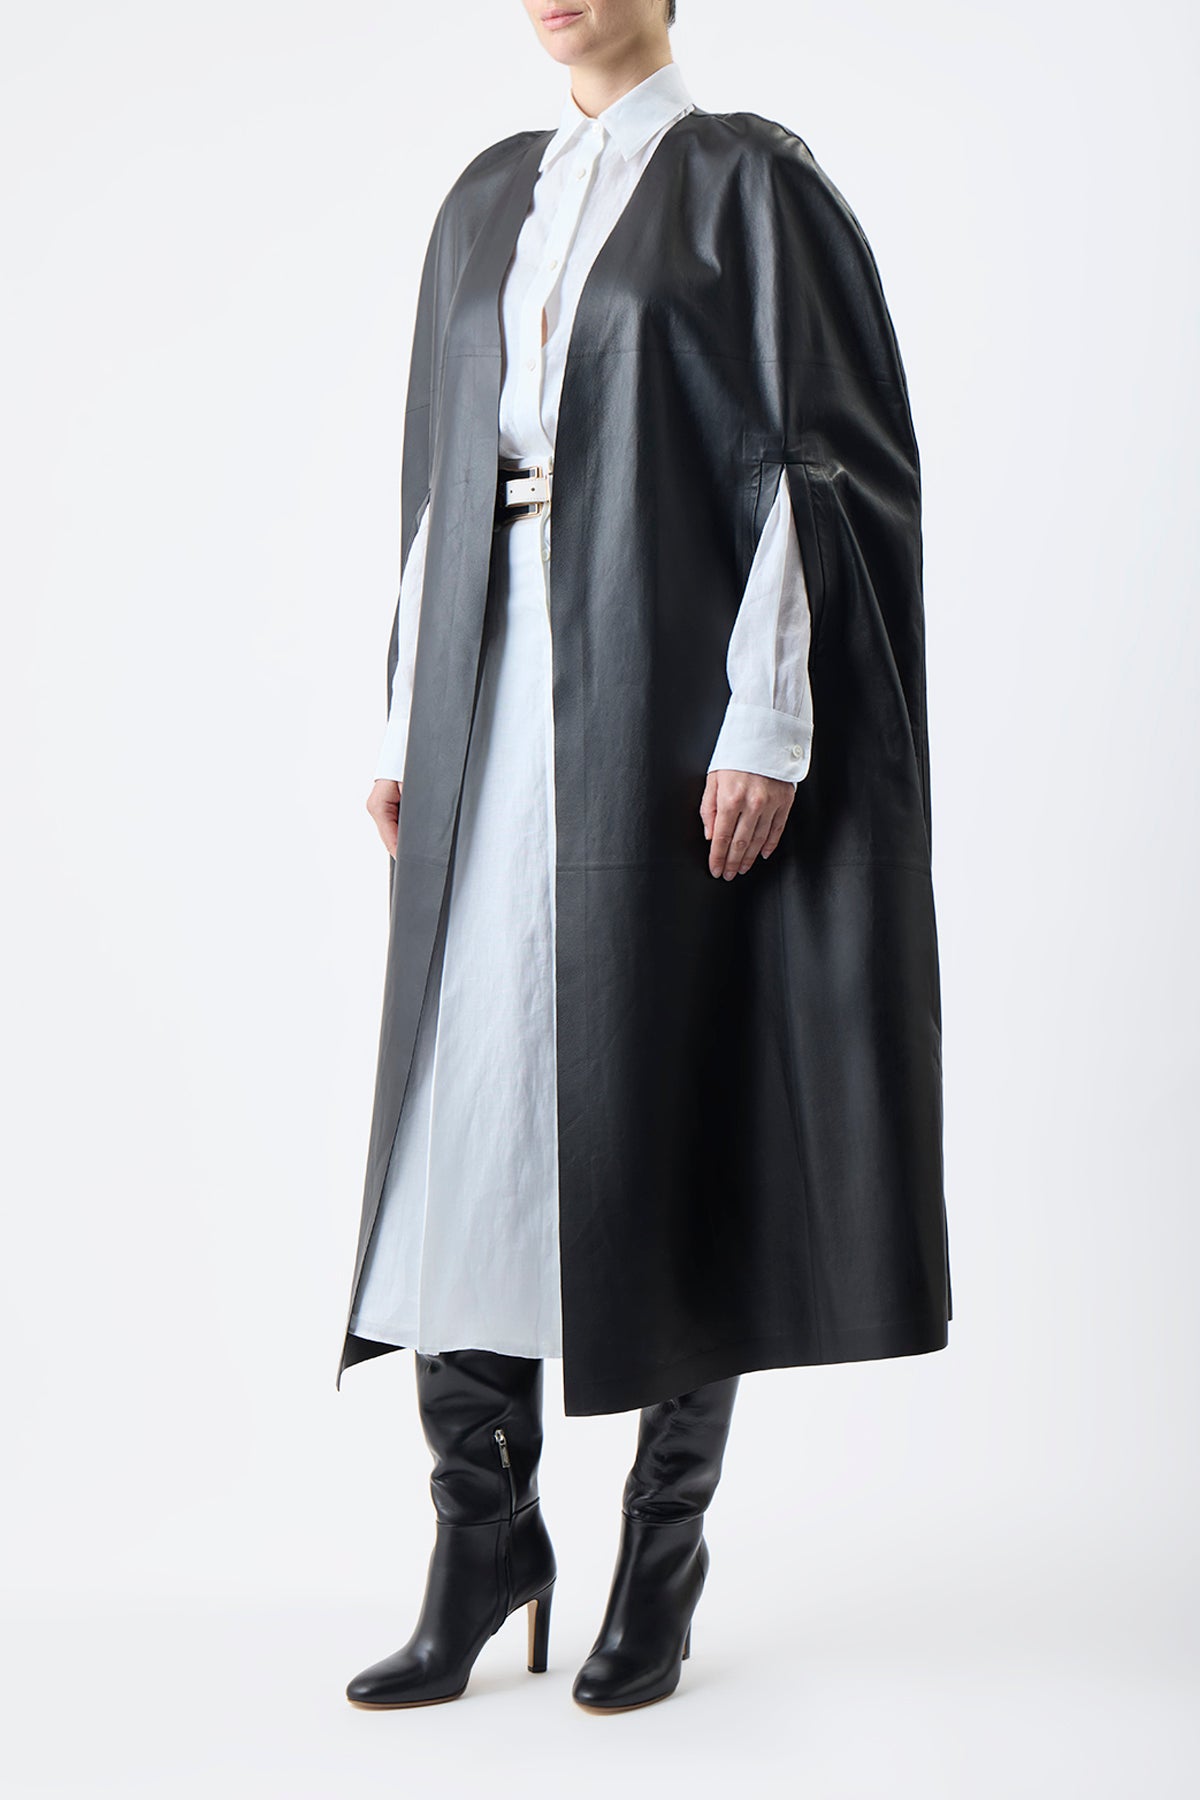 Lindlow Cape in Black Nappa Leather